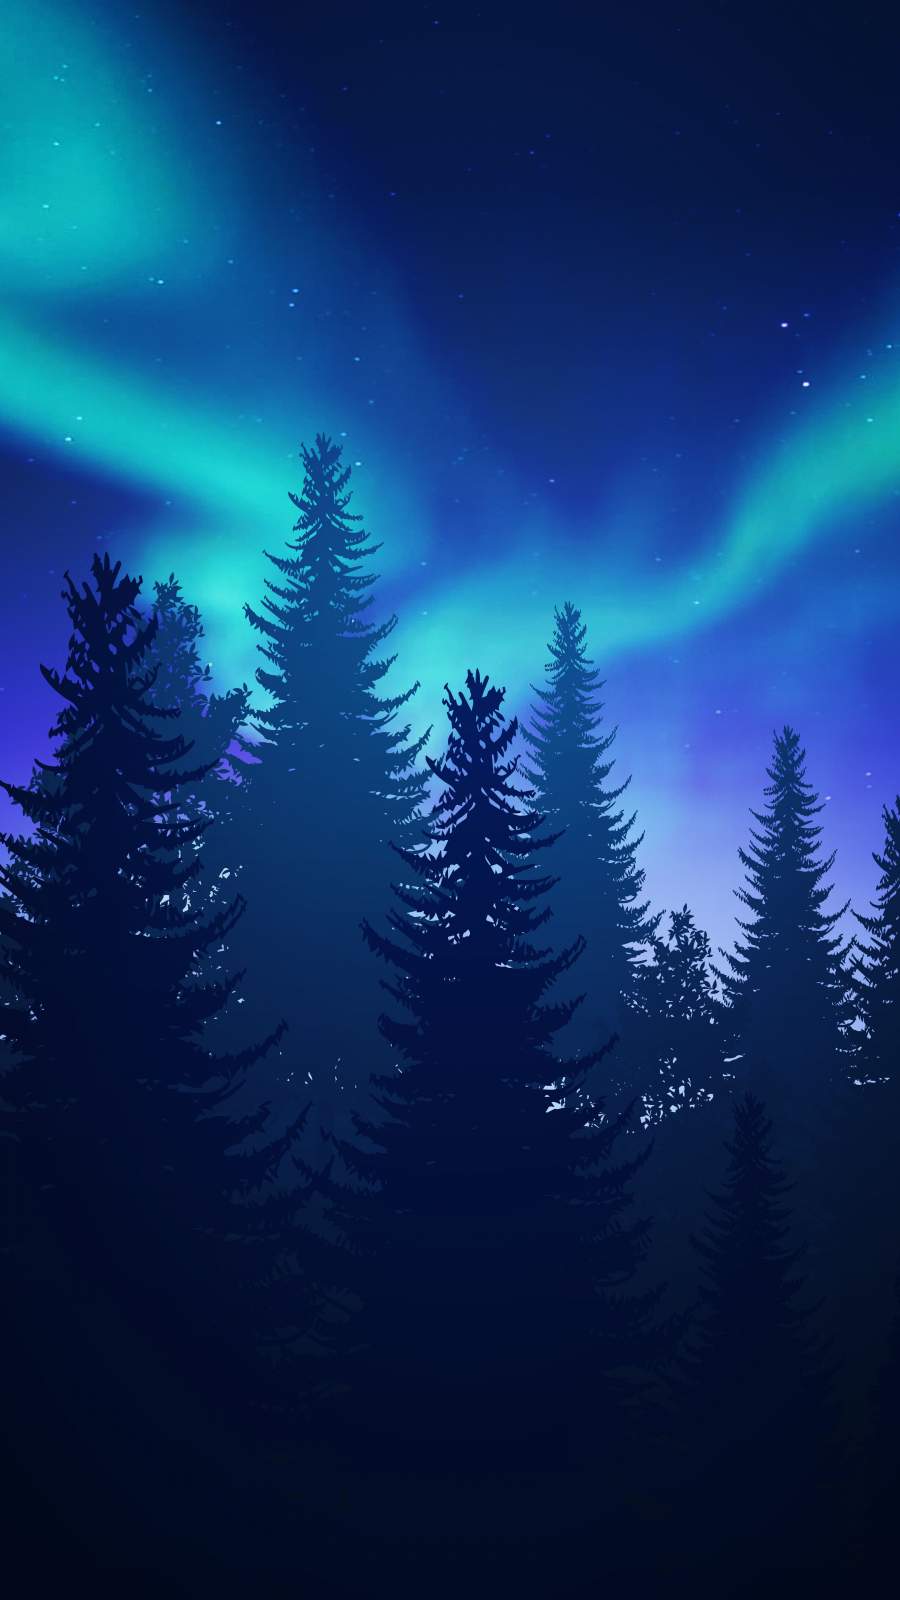 Northern Lights - IPhone Wallpapers : iPhone Wallpapers